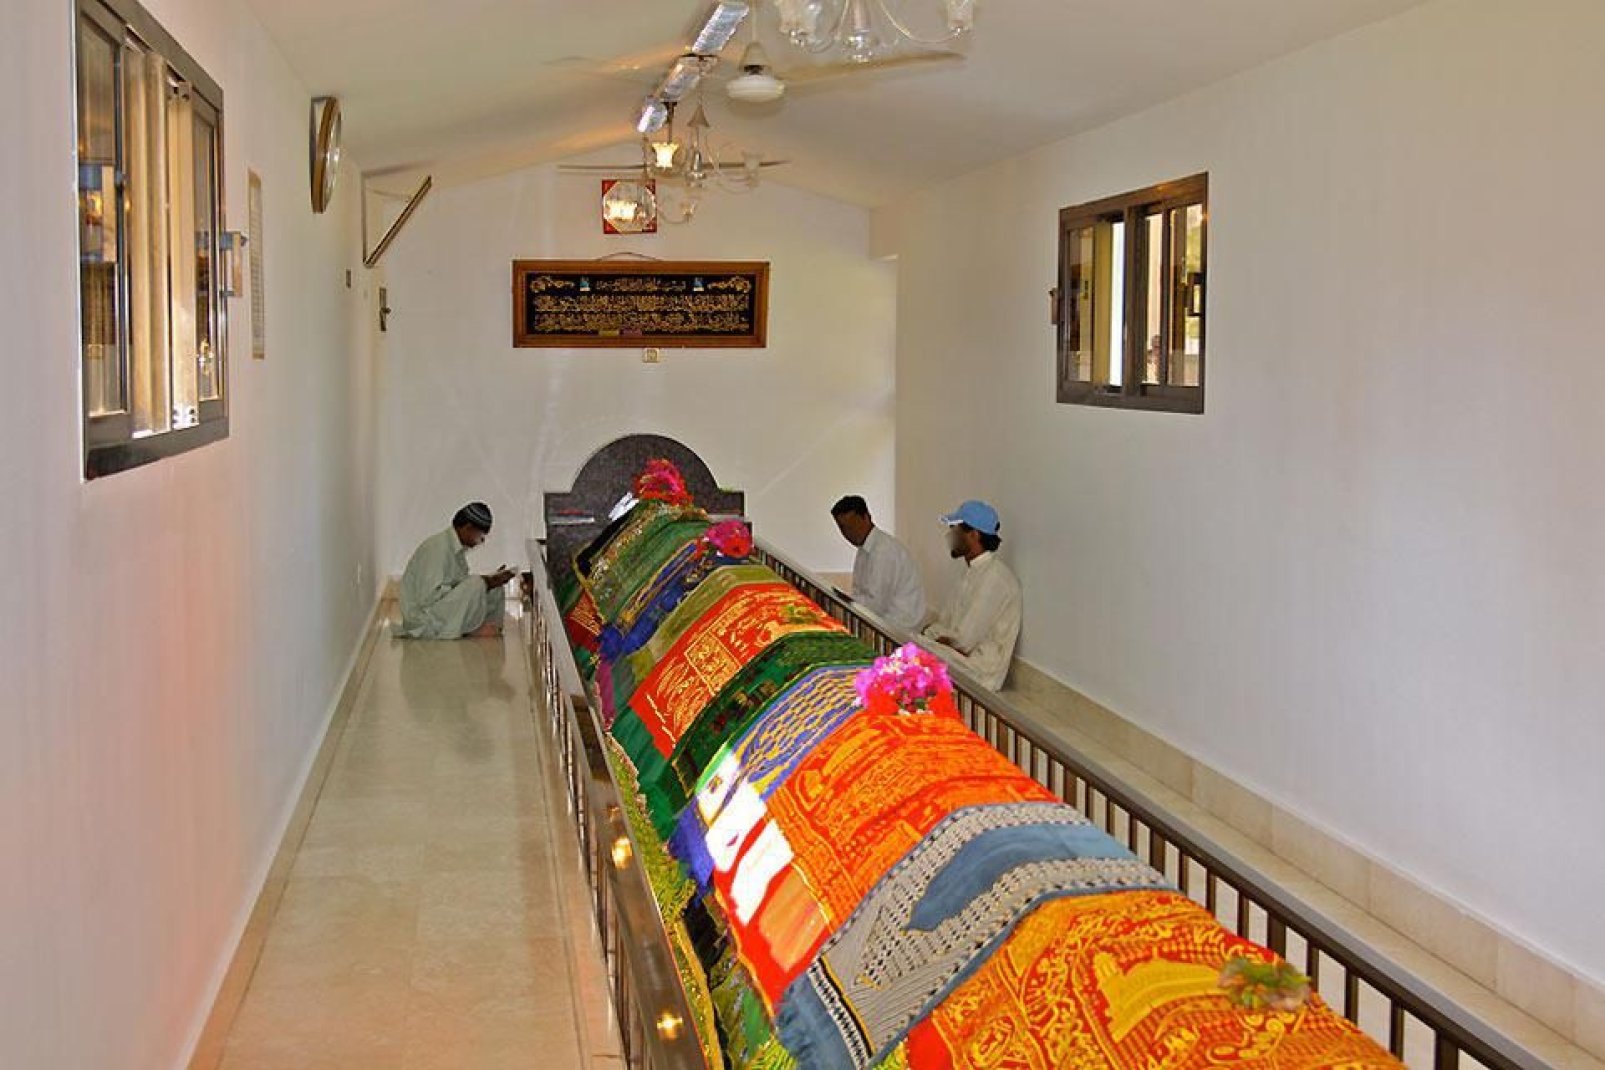 8 metres long and covered with a rug, this is a sacred spot for those who come to pray here.